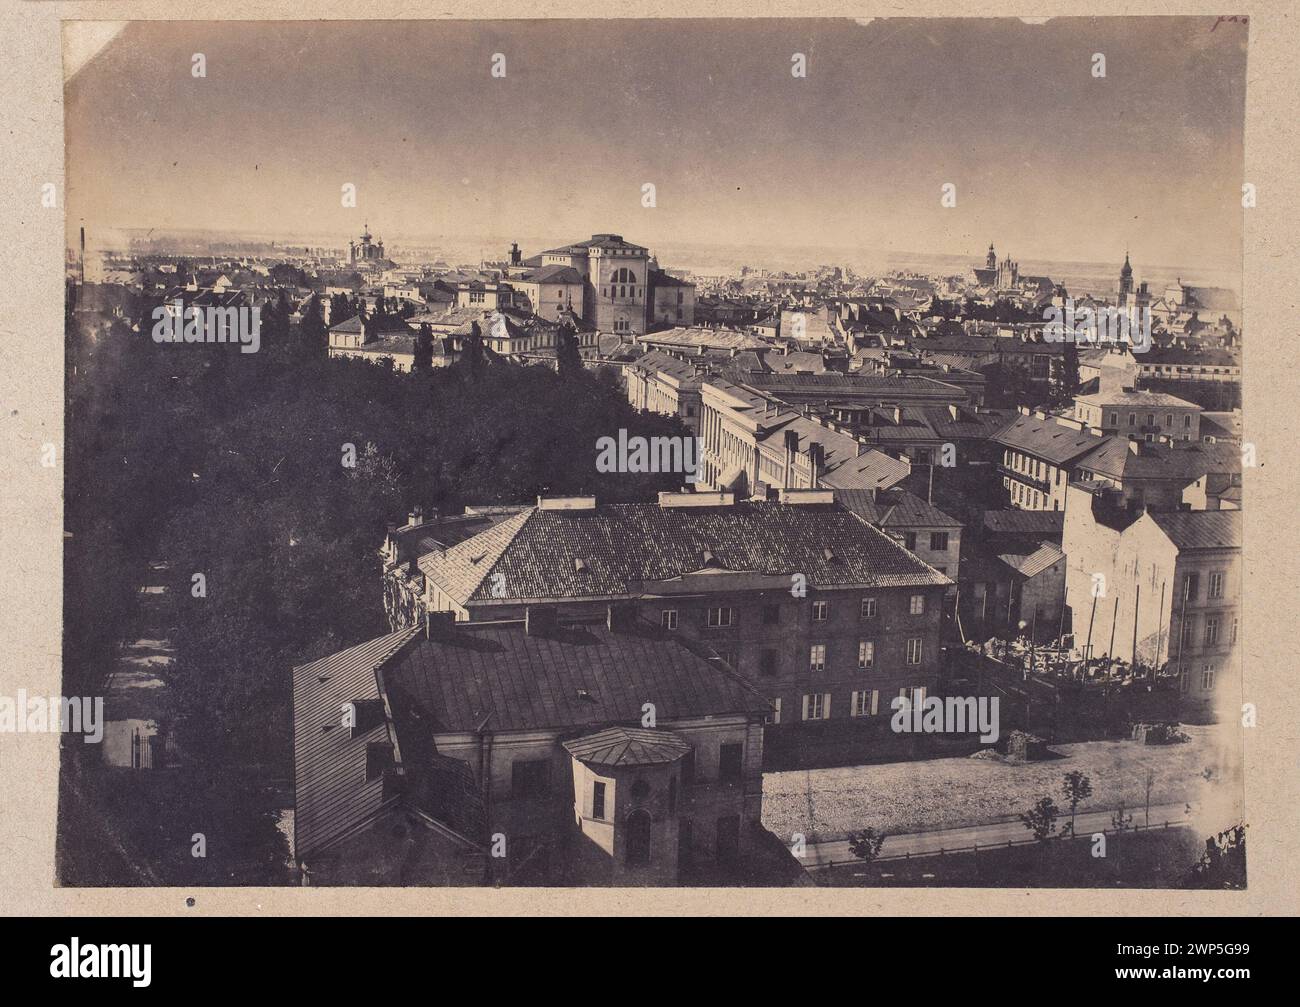 Warsaw. View from the lighthouse of the Evangelical-Augsburg Of the Trinity towards Królewska Street, the Wielkiego Theater and Saxon Square. A fragment of the panorama; Beyer, Karol (1818-1877); 1858 (1858-00-00-1858-00-00);Królewska (Warsaw - street), Méyet, Leopold (1850-1912), Méyet, Leopold (1850-1912) - collection, Saski Palace (Warsaw), Art of photography (Warsaw - exhibition - 1990), Theater Wielki (Warsaw), Warsaw (Masovian Voivodeship), Dar (provenance), city panoramas, testamentary record (provenance), photosensitive (Warsaw - exhibition - 2009) Stock Photo